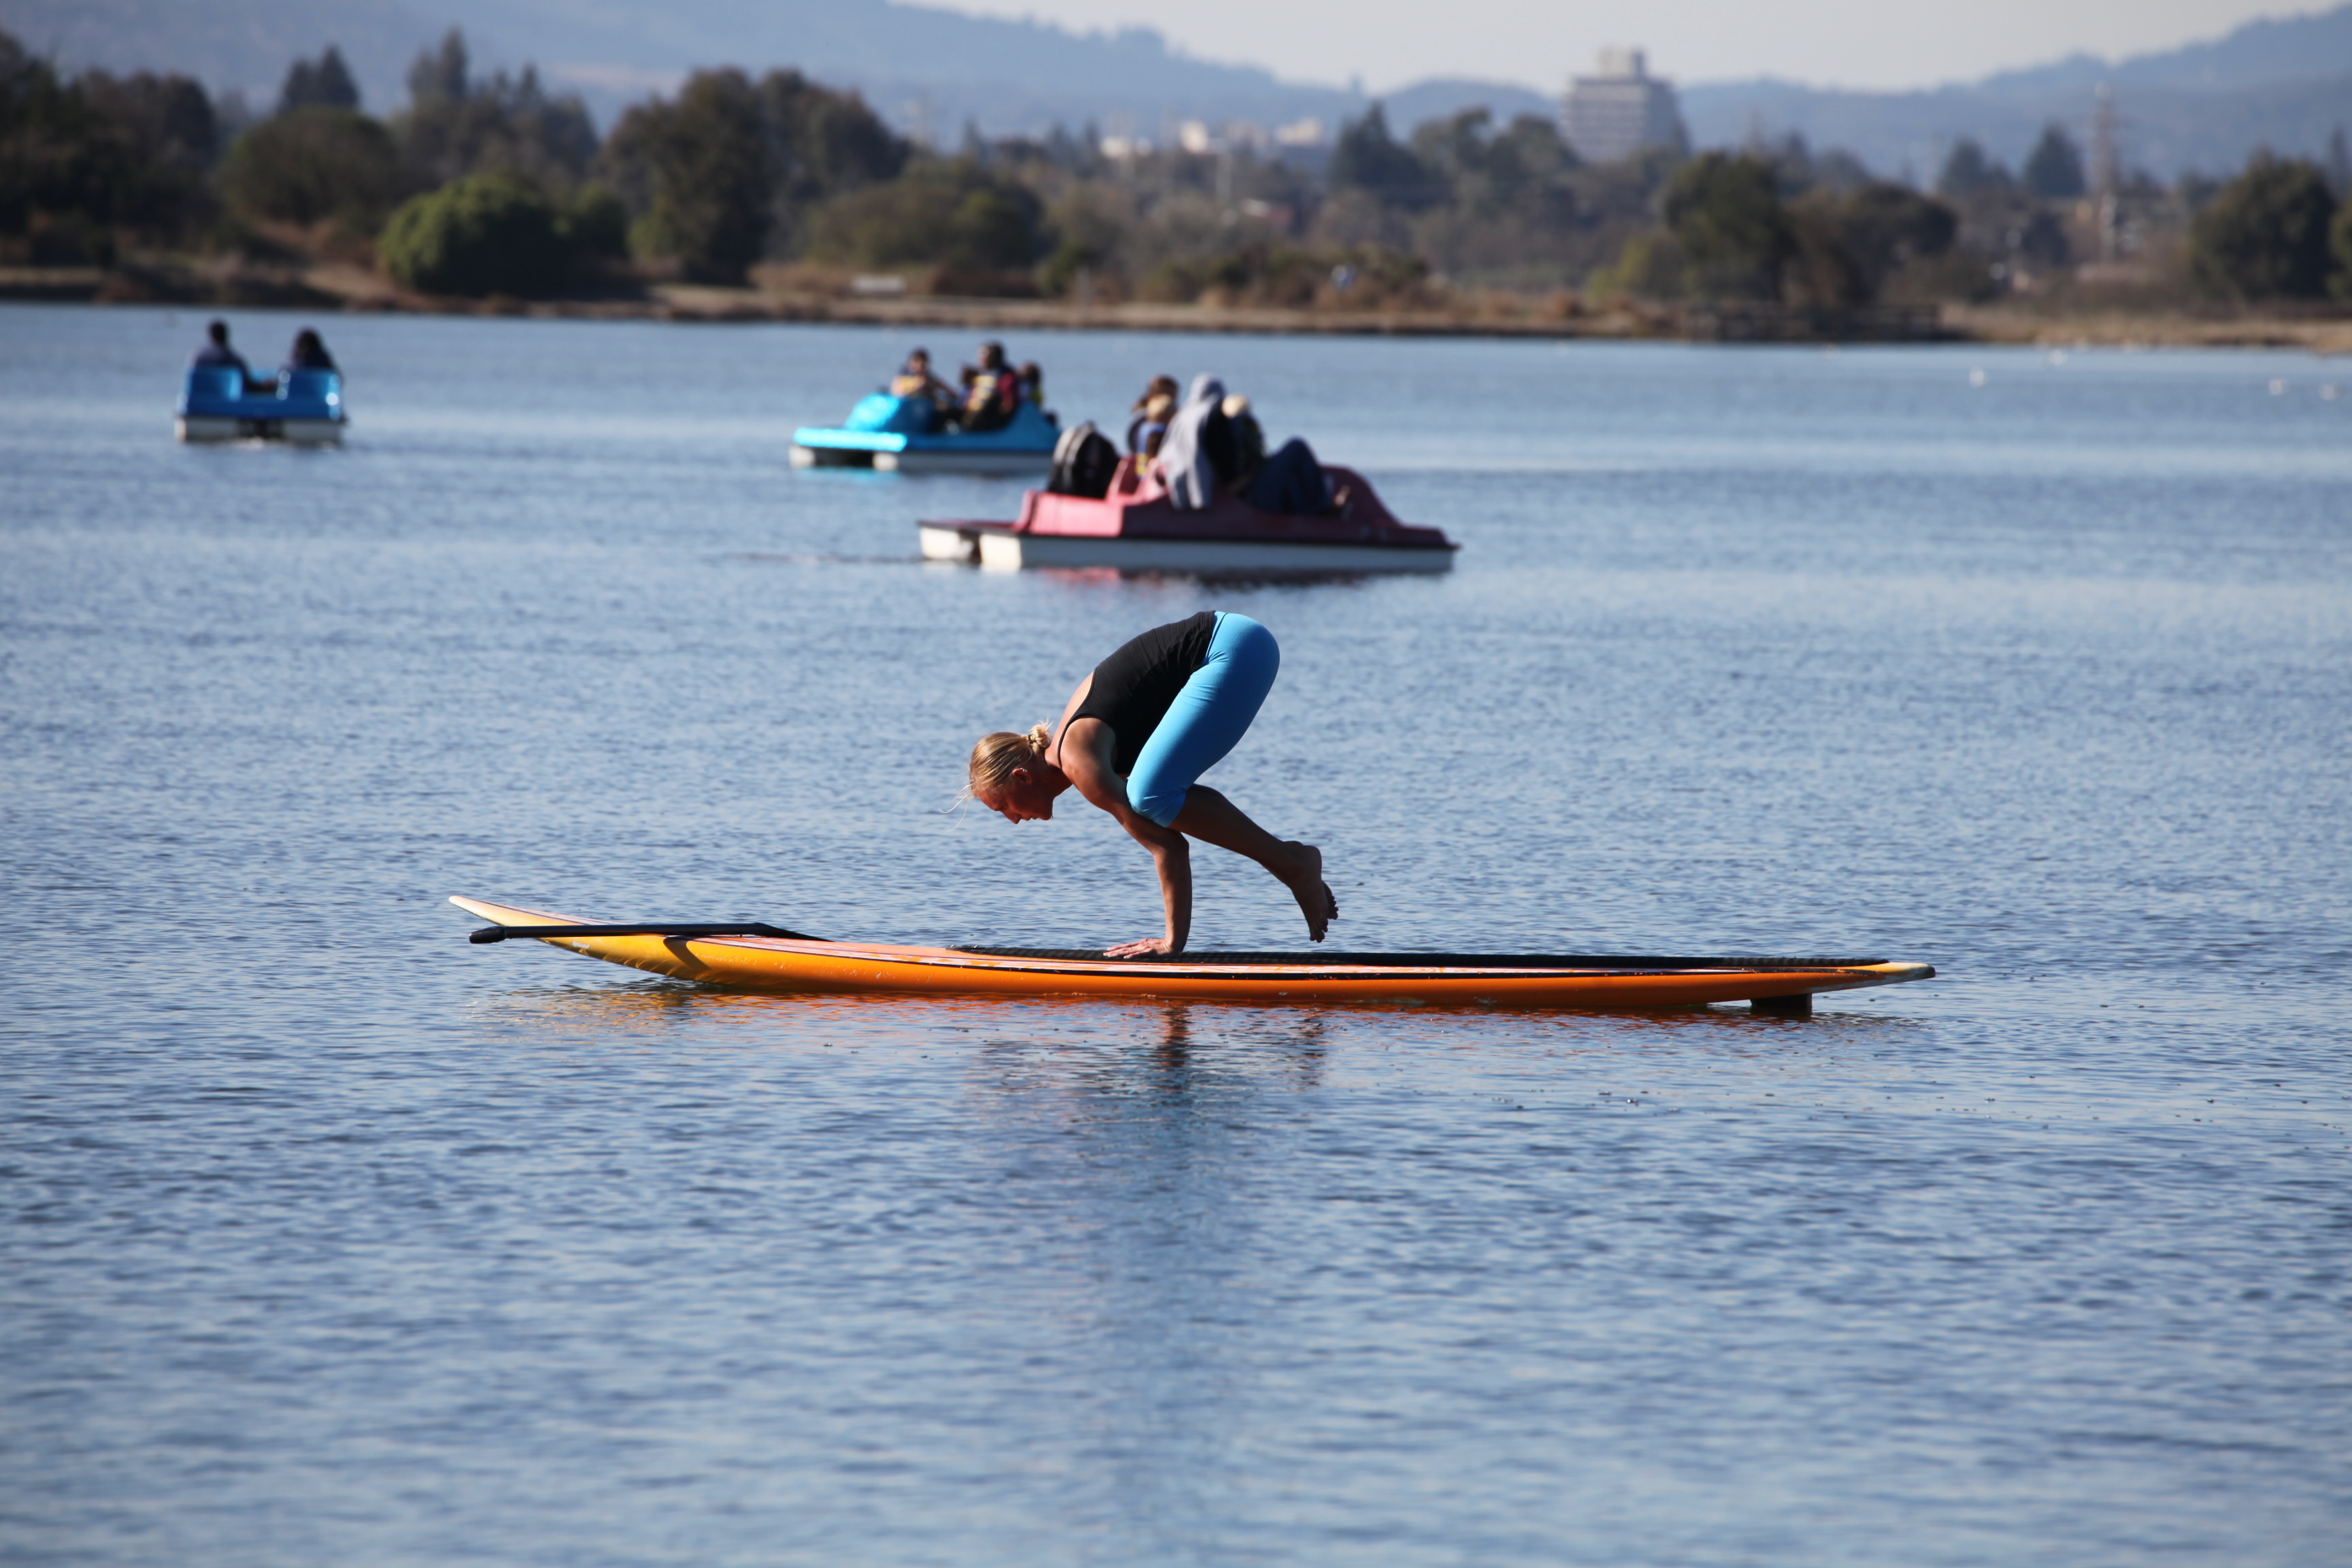 A person in a wetsuit balances on a paddleboard, with pedal boats in the background on calm water.